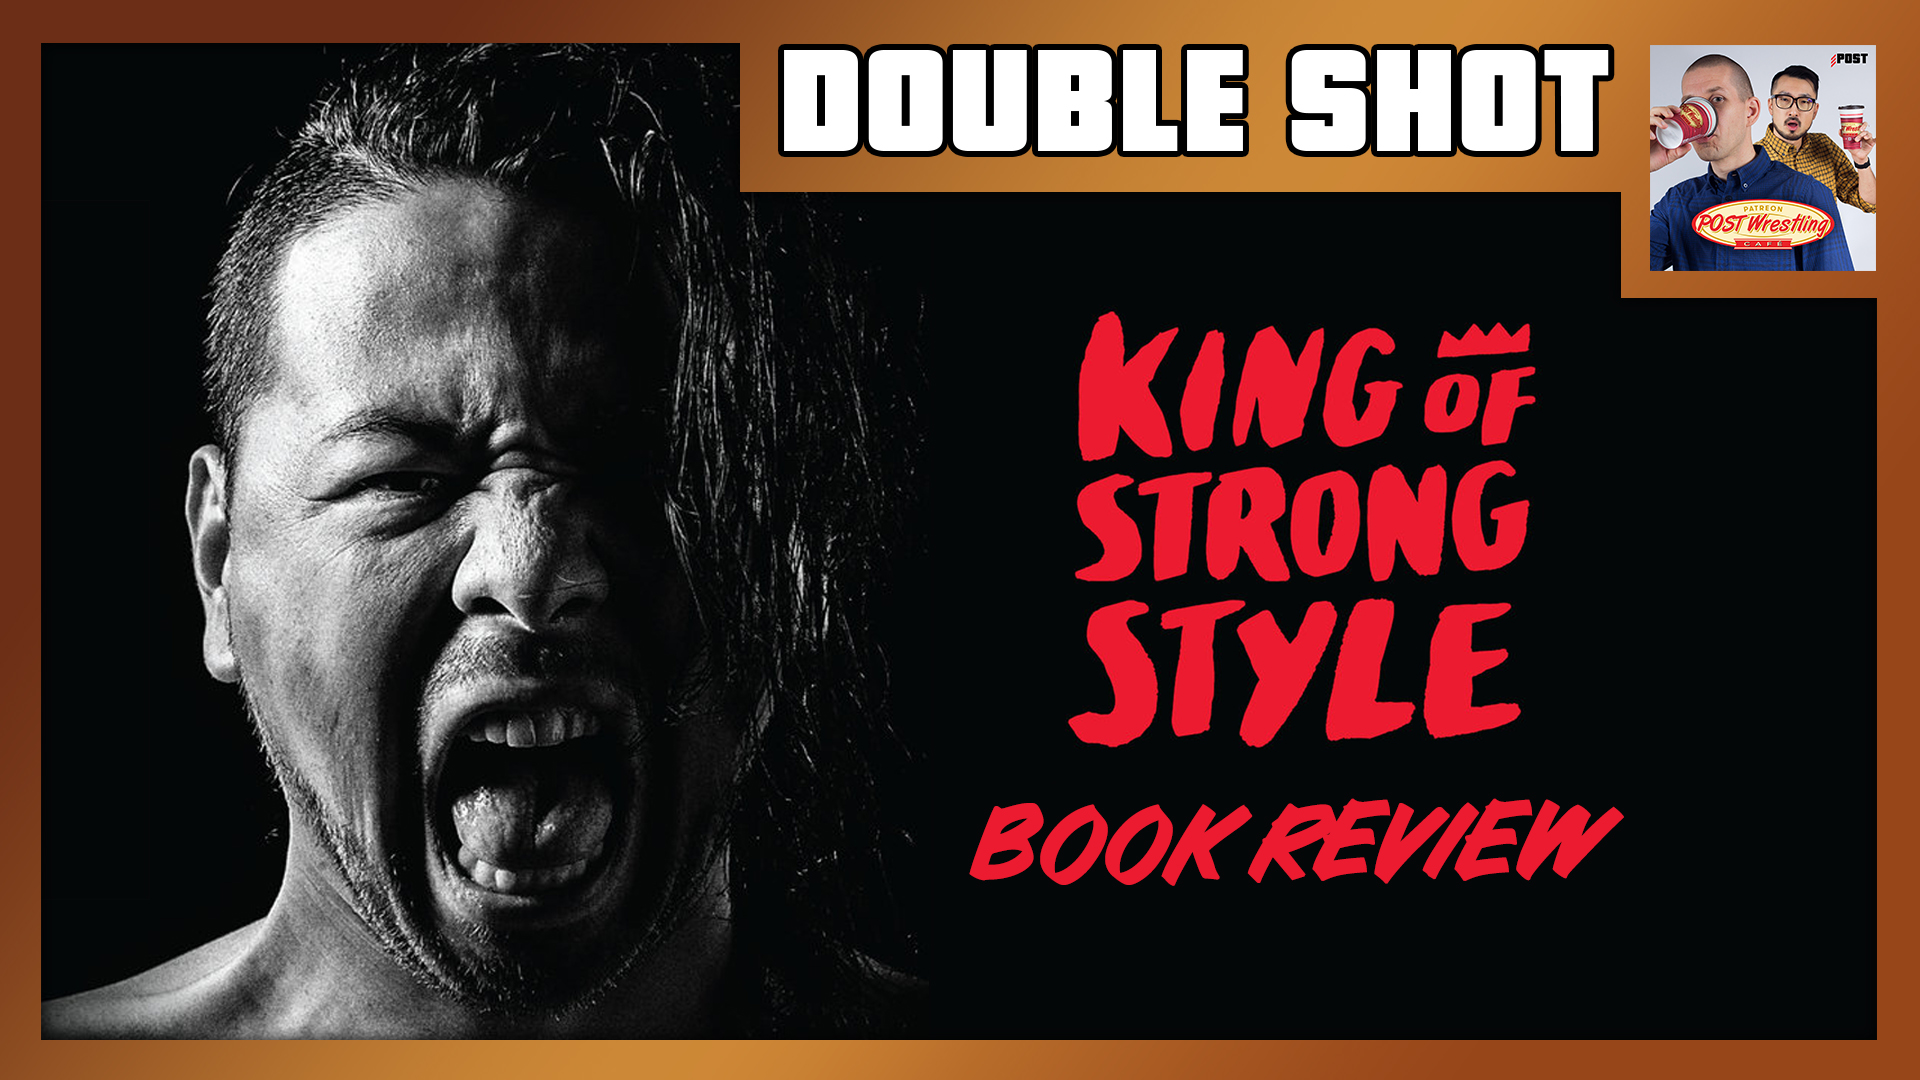 Double Shot 9 5 18 King Of Strong Style By Shinsuke Nakamura John S Mystery Review Post Wrestling Wwe Nxt Aew Njpw Ufc Podcasts News Reviews